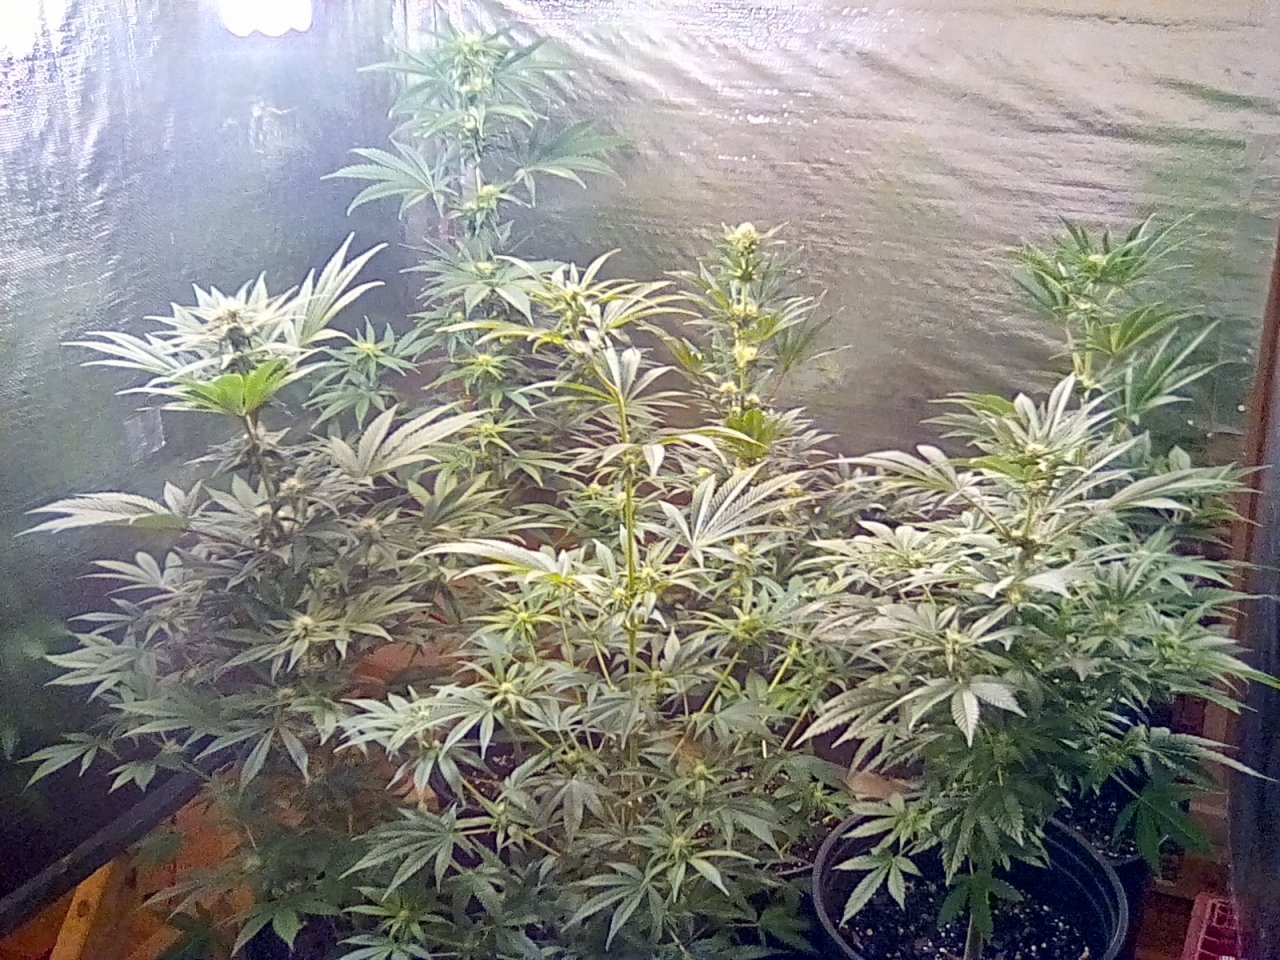 Day 30 and 22 of the flip